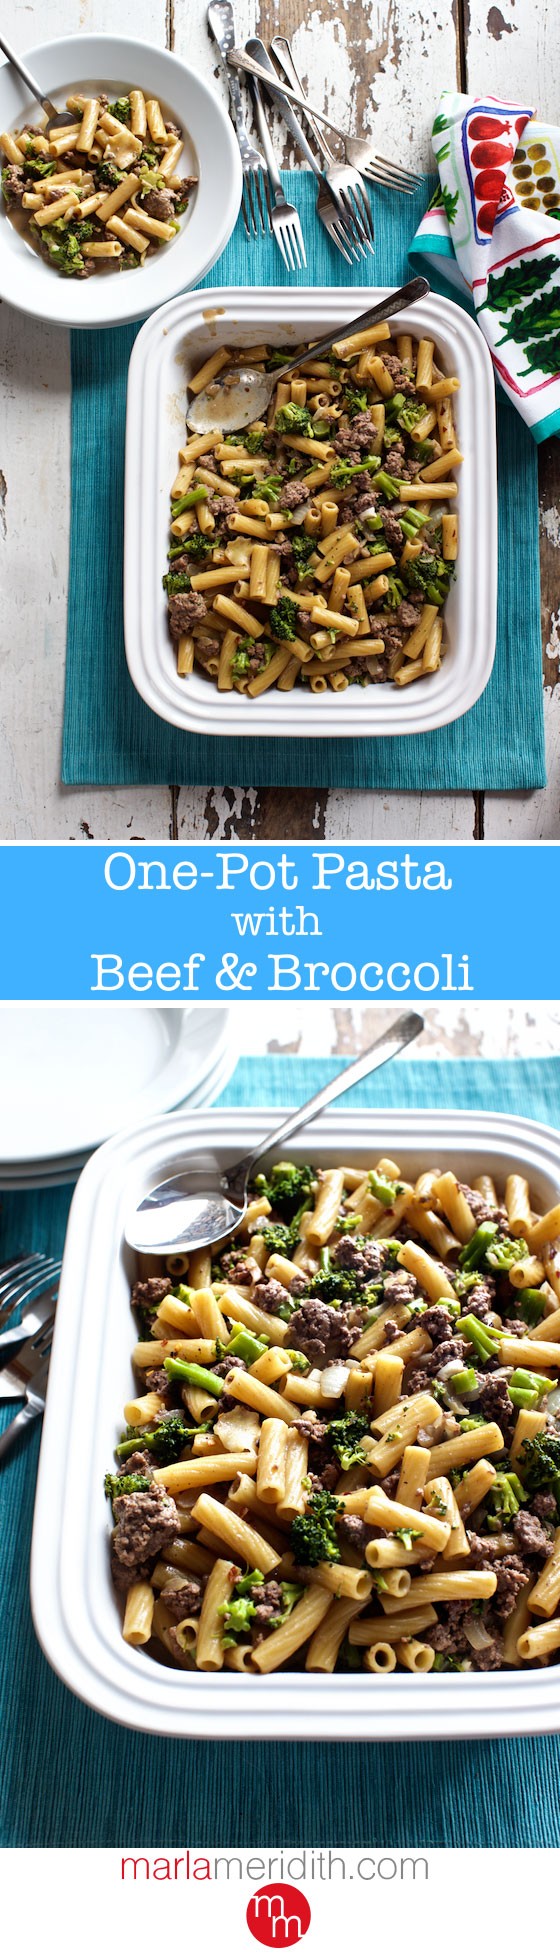 One Pot Pasta with Beef & Broccoli. A simple recipe for family dinner & leftovers perfect for lunch boxes too! MarlaMeridith.com ( @marlameridith )